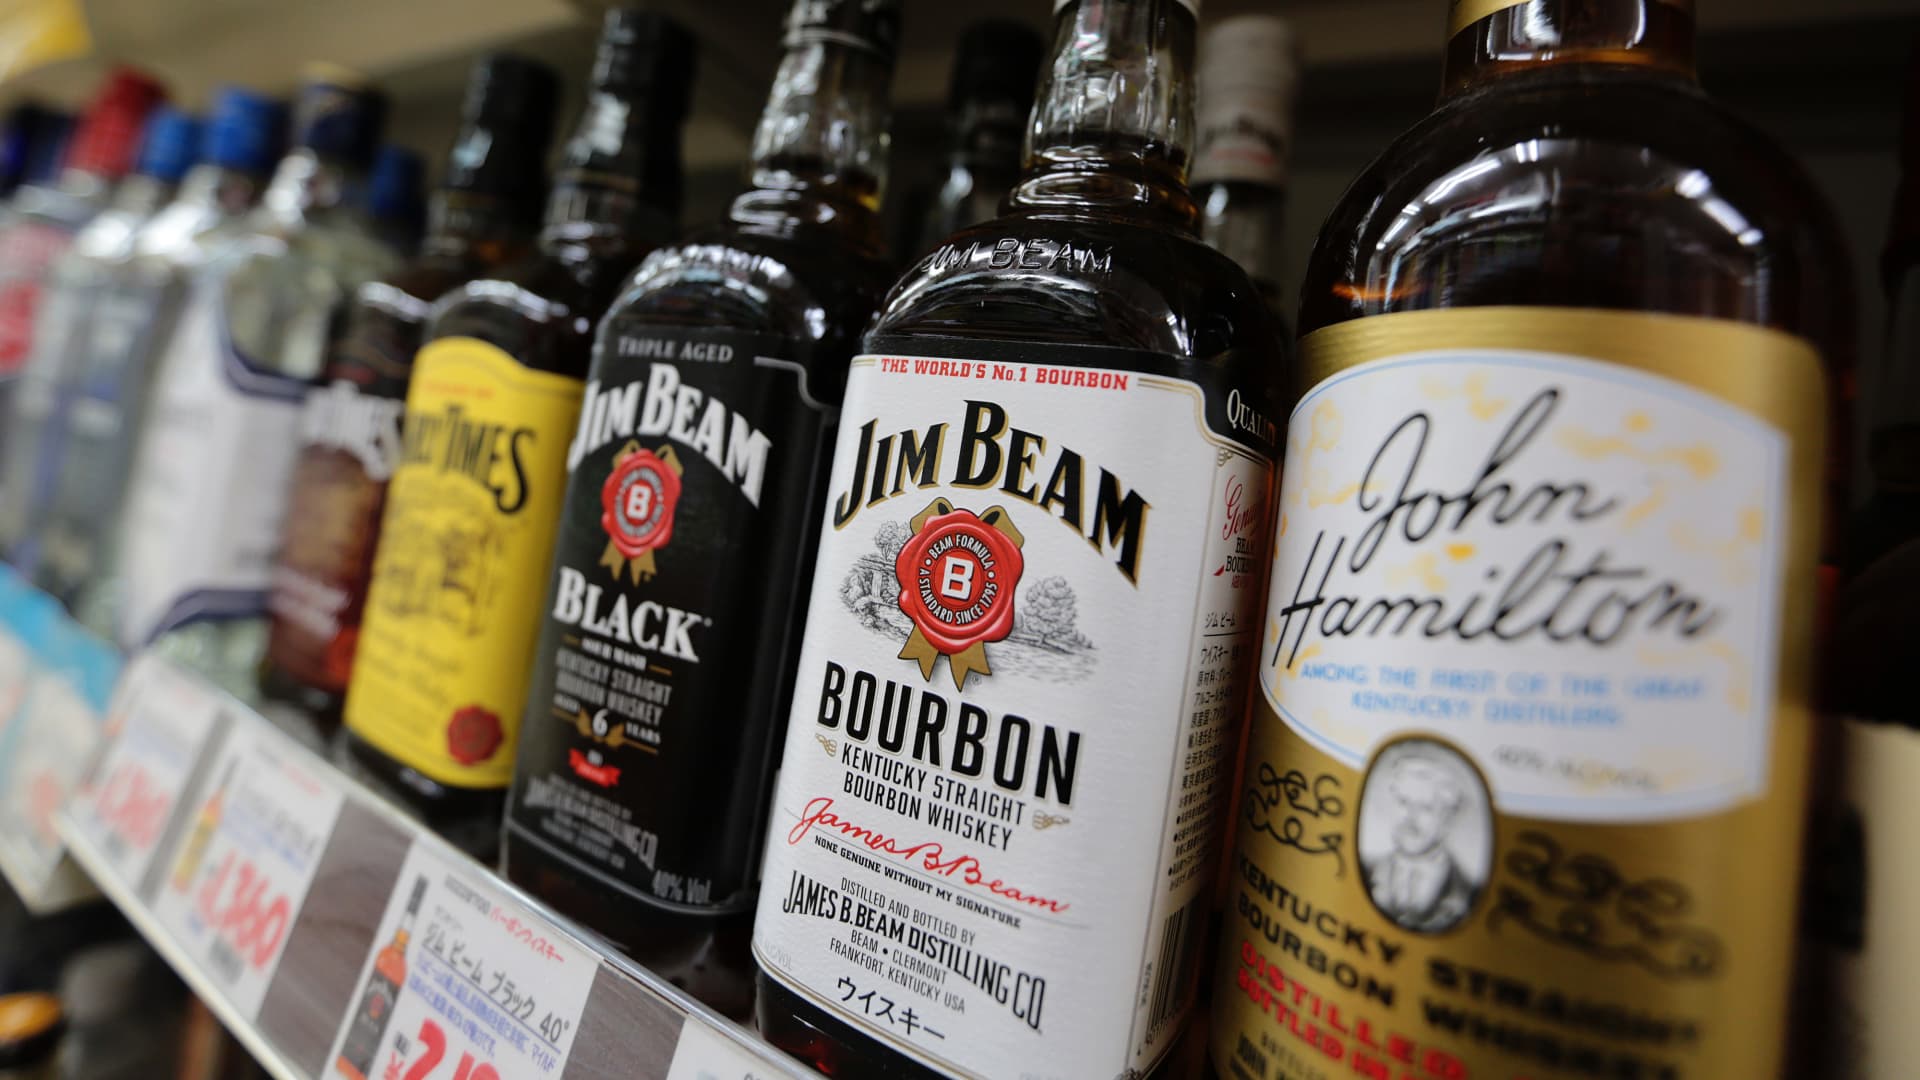 Some spirits drinkers are starting to trade down, Beam Suntory says